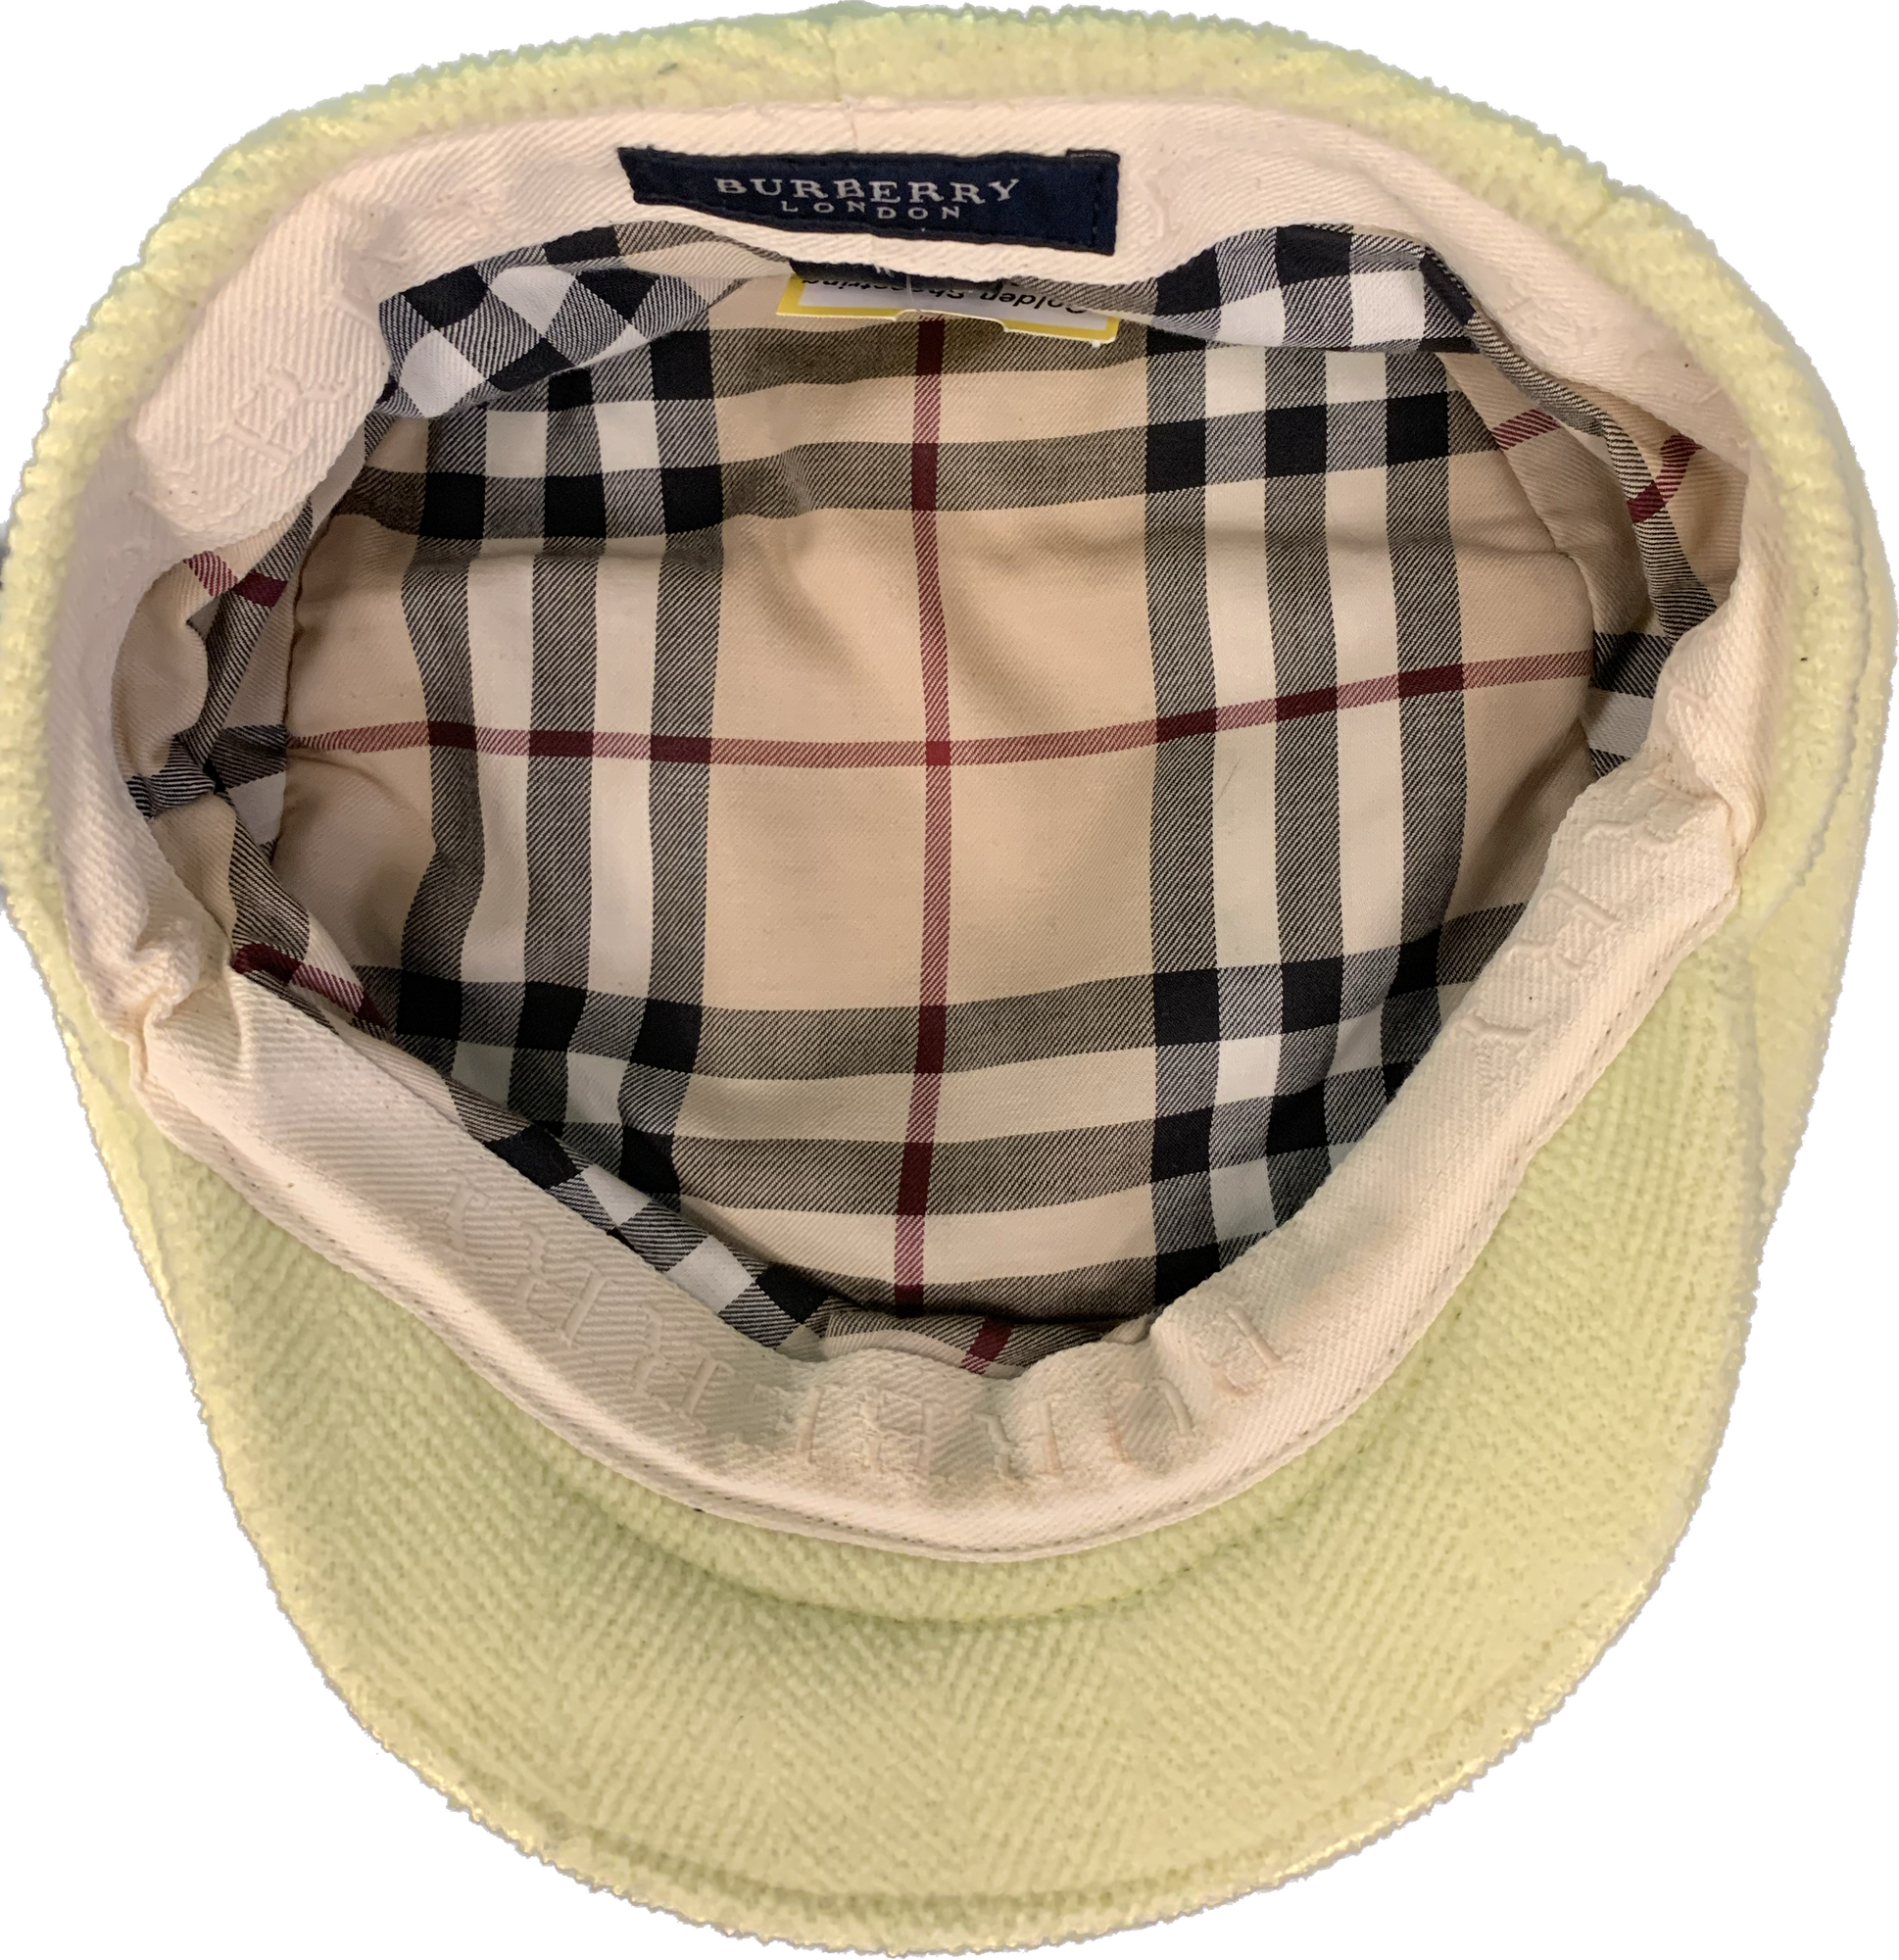 Burberry Driver Wool
Lime, Size: Medium